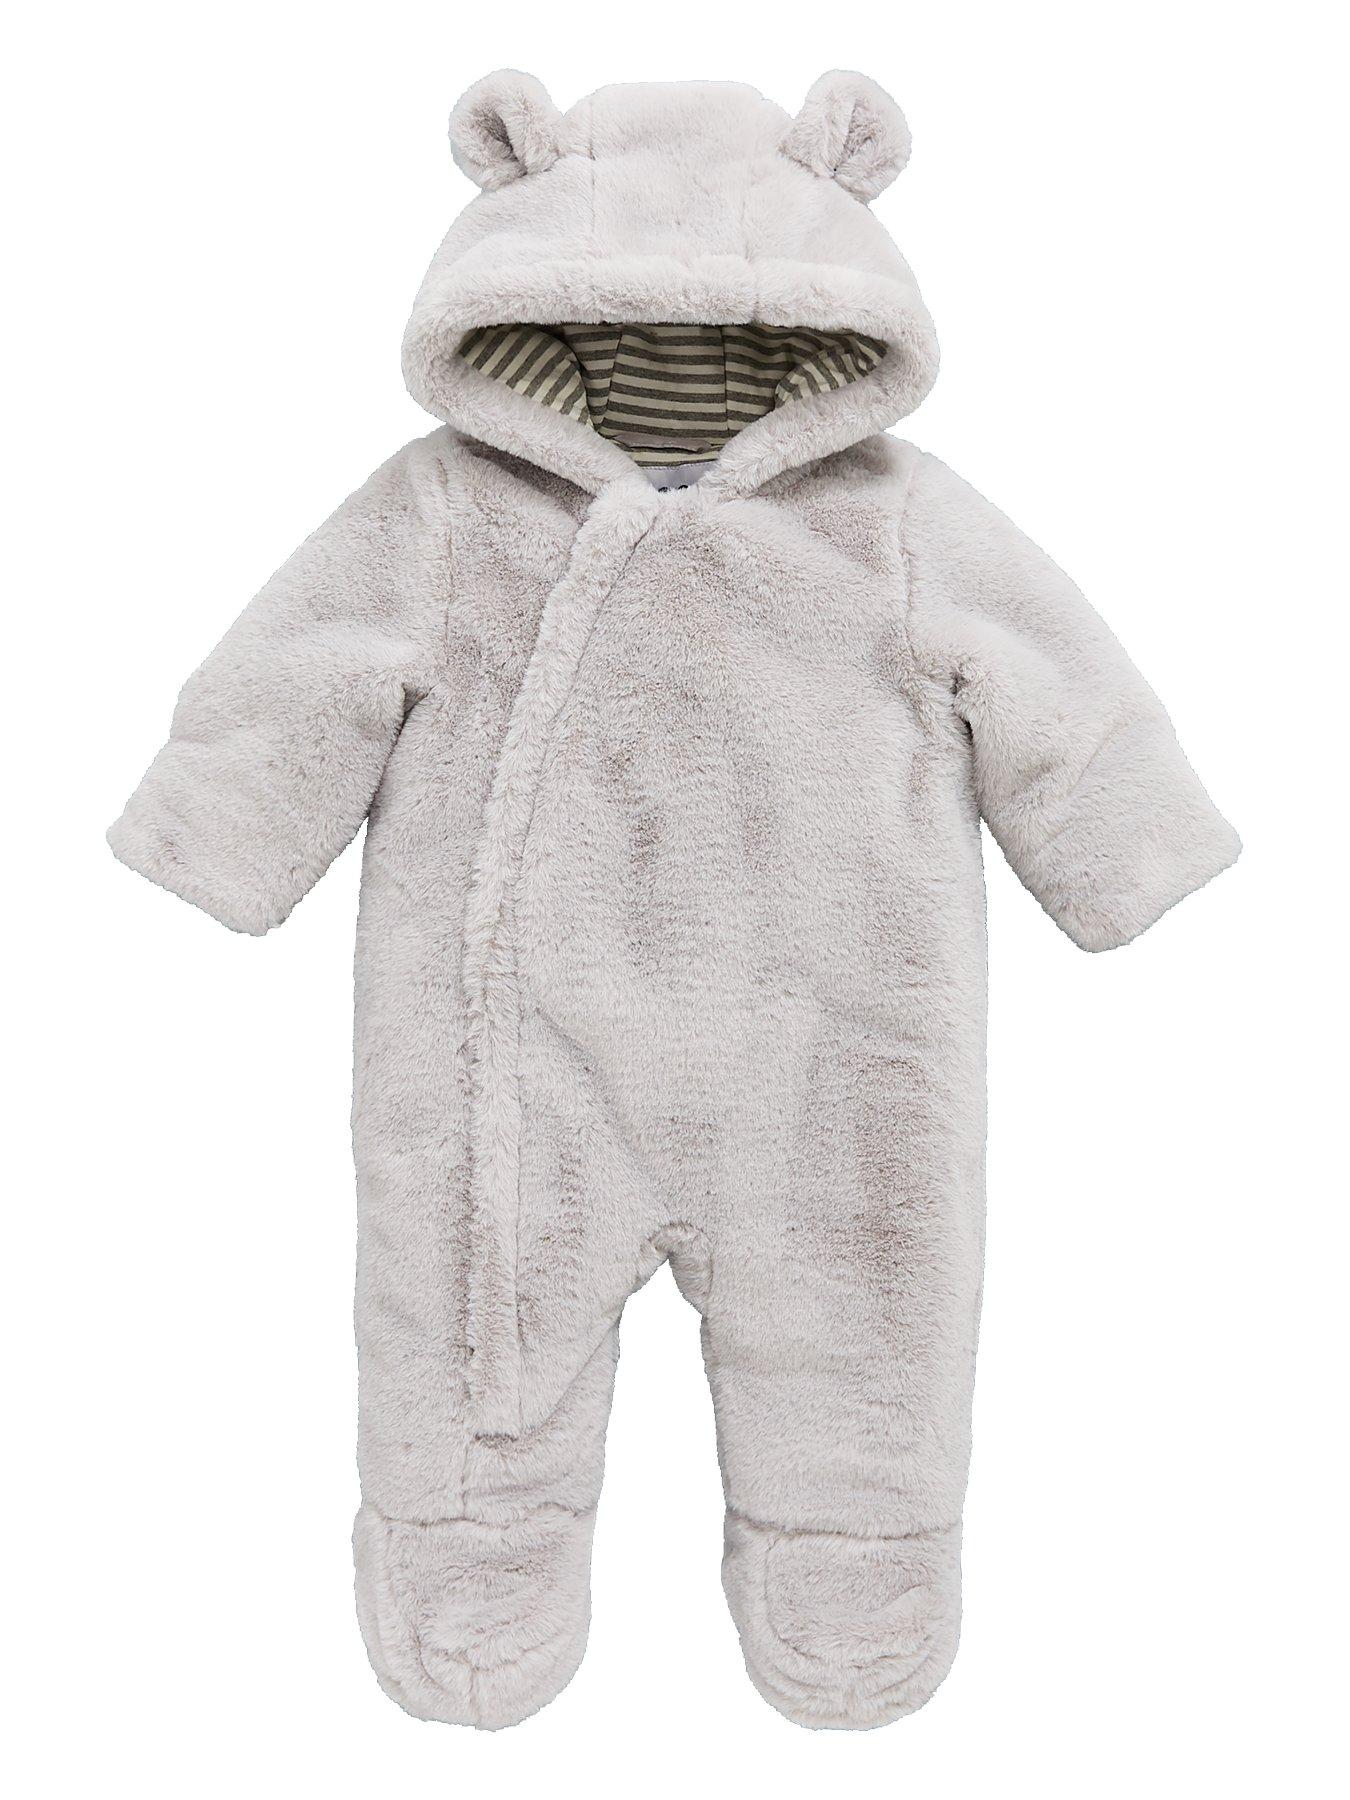 Baby Clothes | Branded Baby Clothing | Very.co.uk